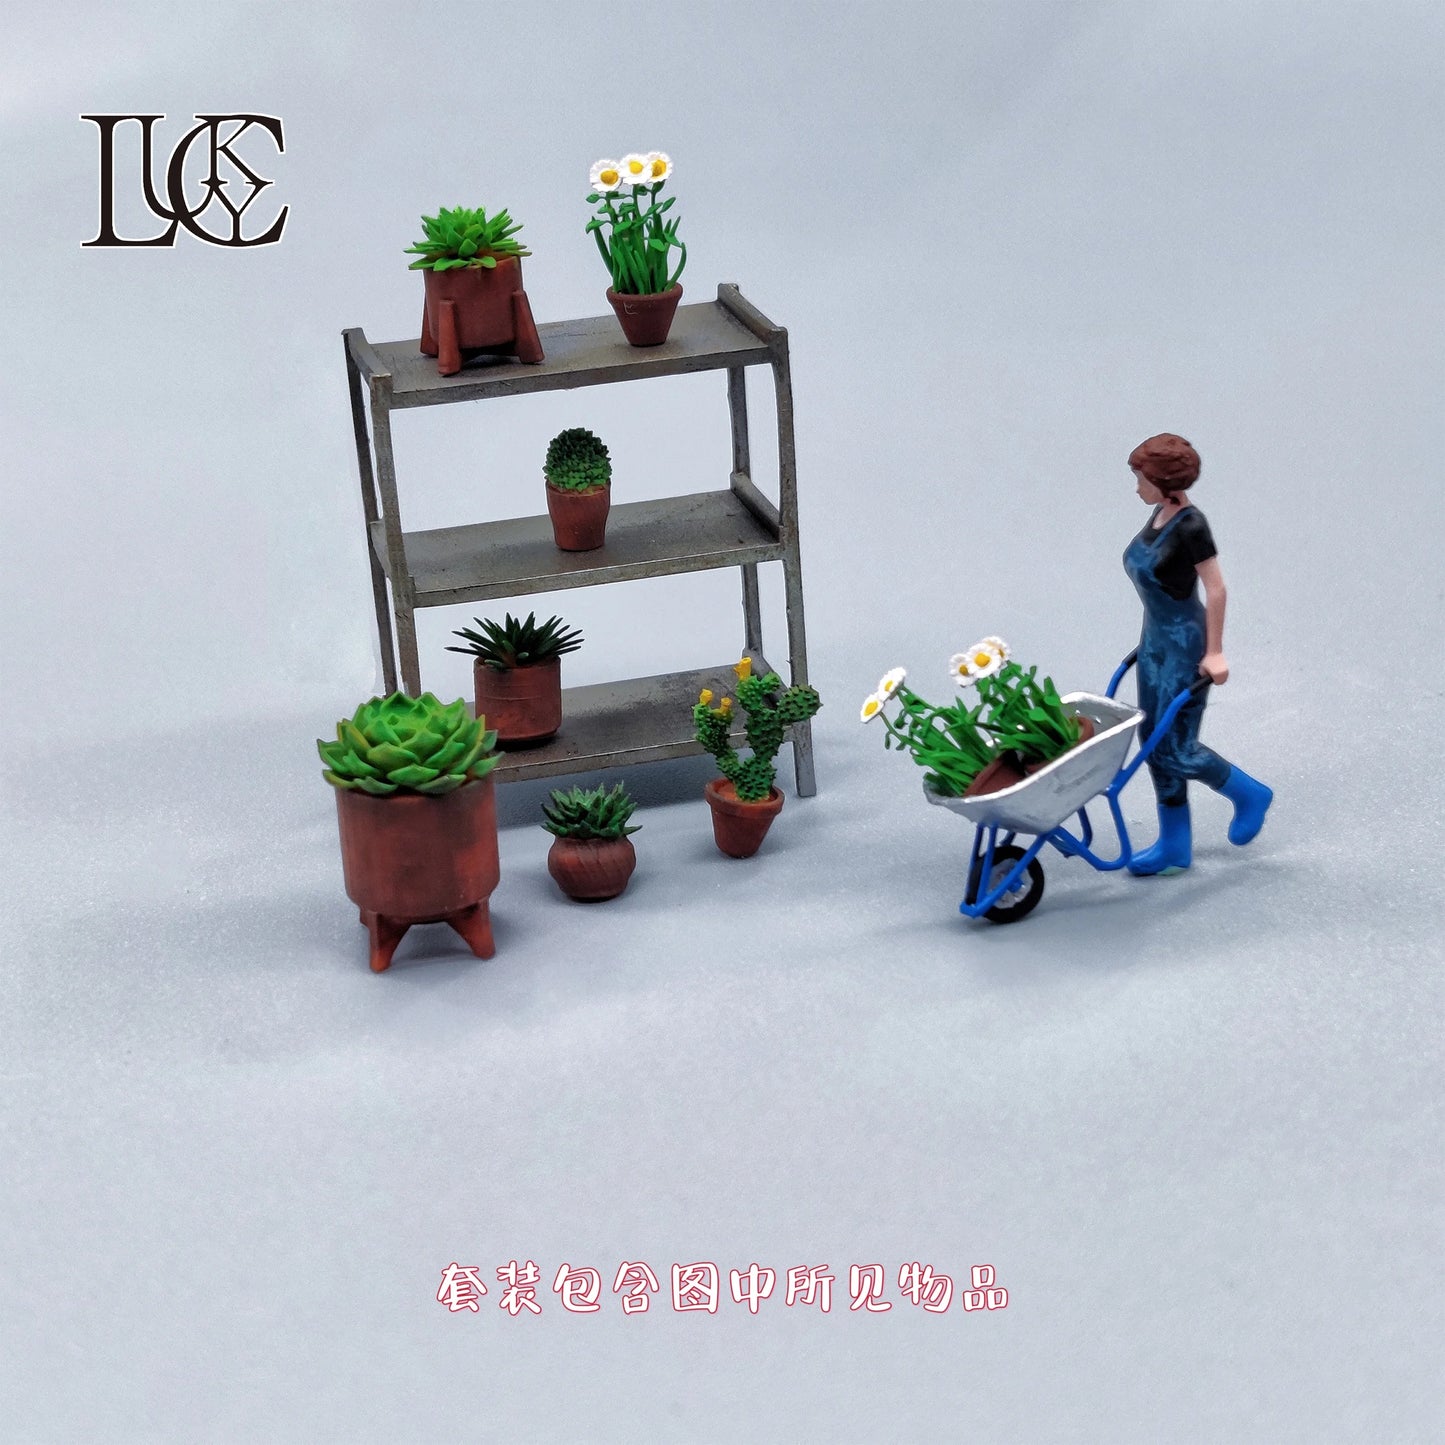 Lucky Studio Diorama 1/64 Scale Figurines Model Flower Farmer and Green Plant Set Collection Miniature Hand-painted